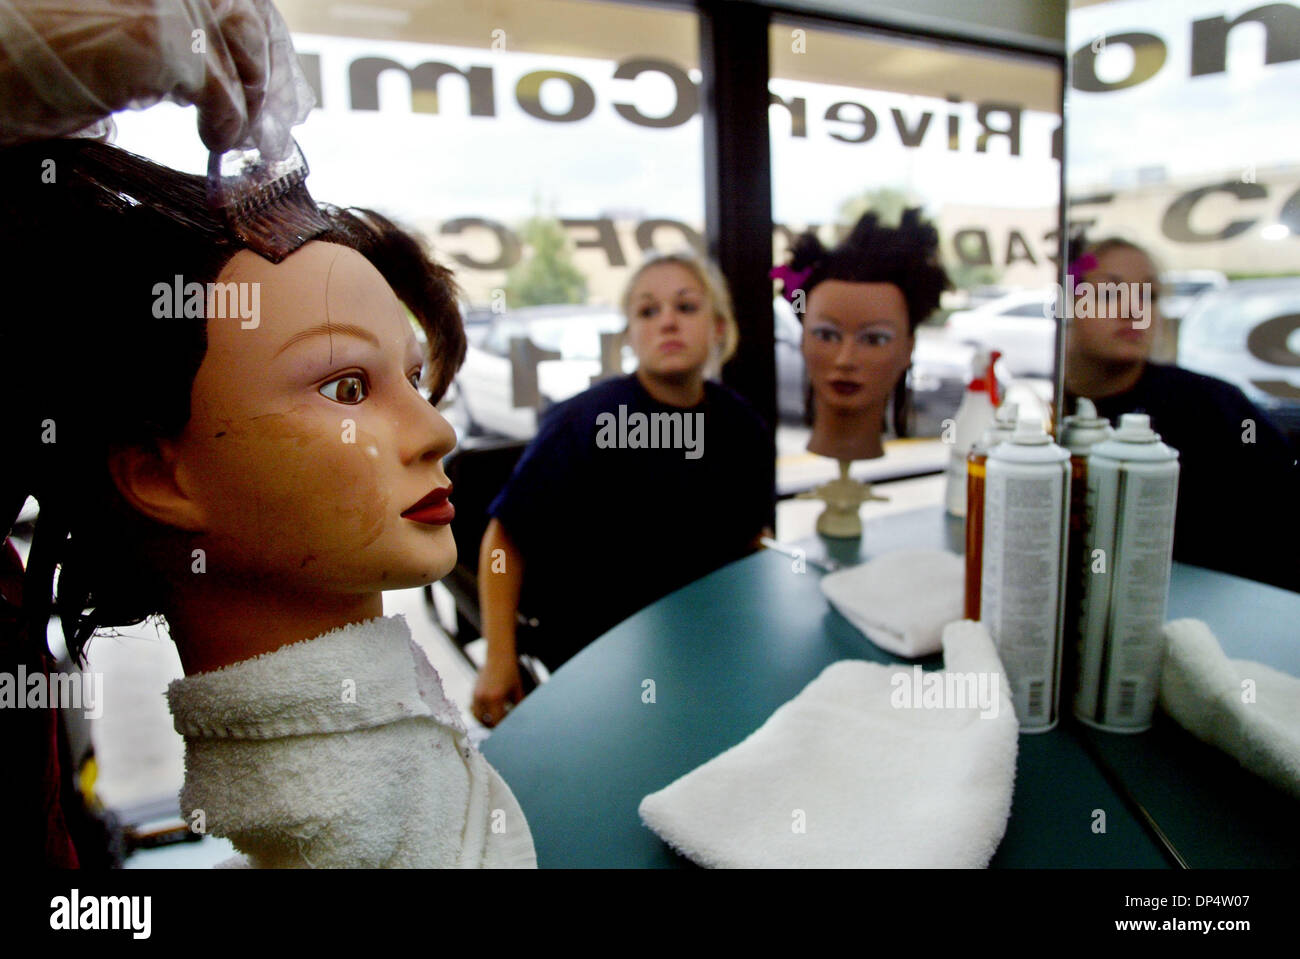 Salon Students Use Real Human Hair Training Mannequin Head Indian